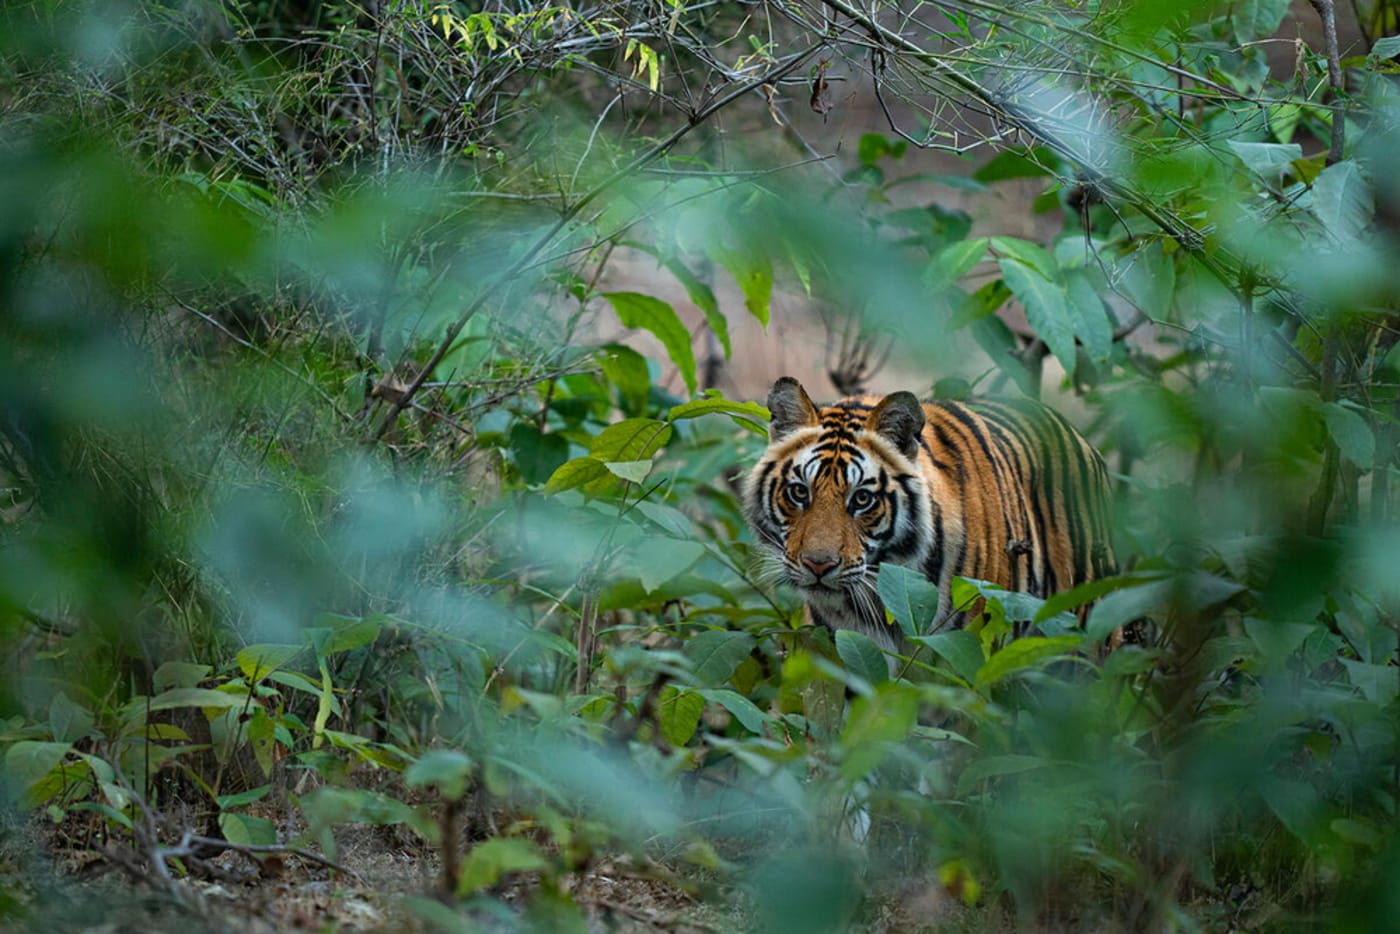 A tiger looks at the camera through lush green vegetation.